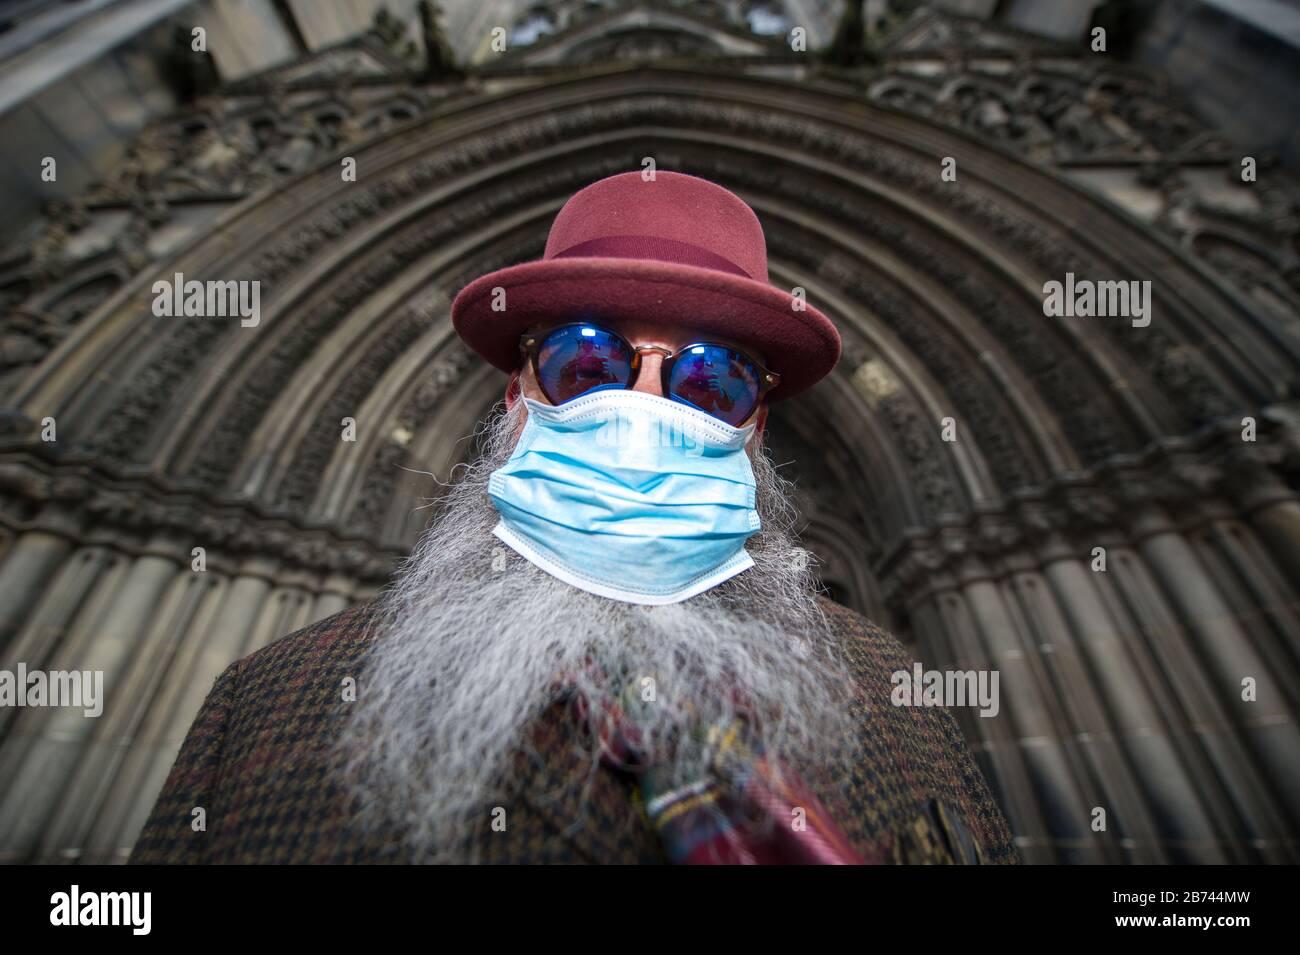 Edinburgh, UK. 13th Mar, 2020. Pictured: Man seen wearing surgical mask and covering his nose and mouth due to the Coronavirus pandemic. Credit: Colin Fisher/Alamy Live News Stock Photo